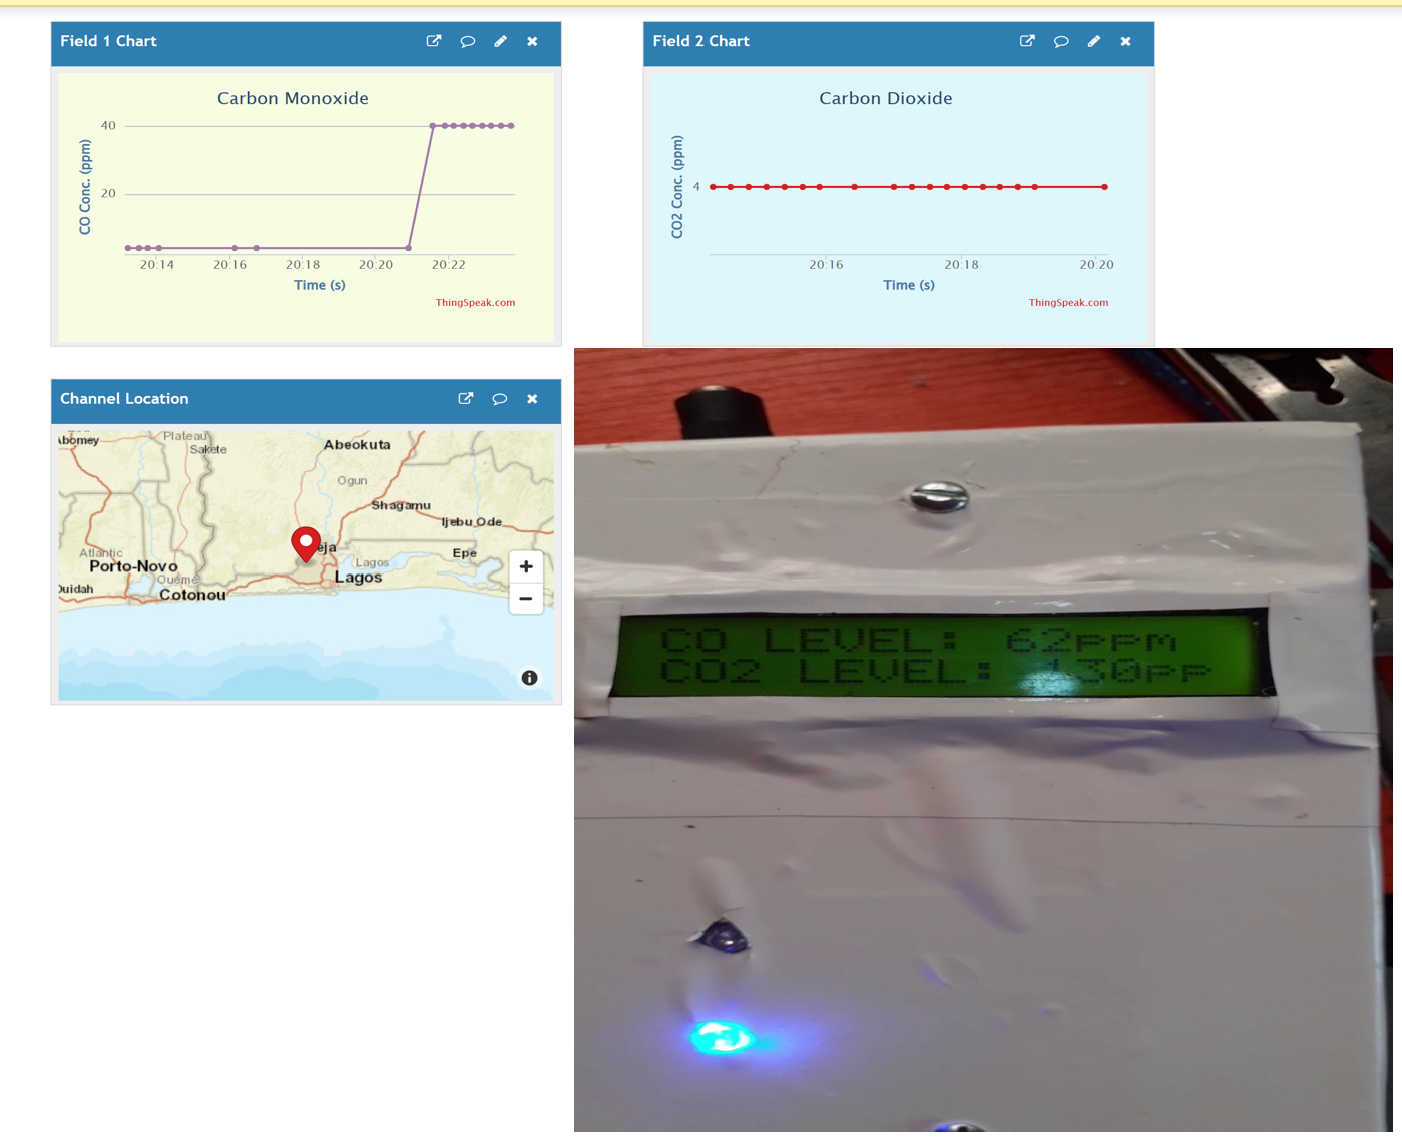 IoT Based Carbon Monoxide and Carbon Dioxide Monitoring Device